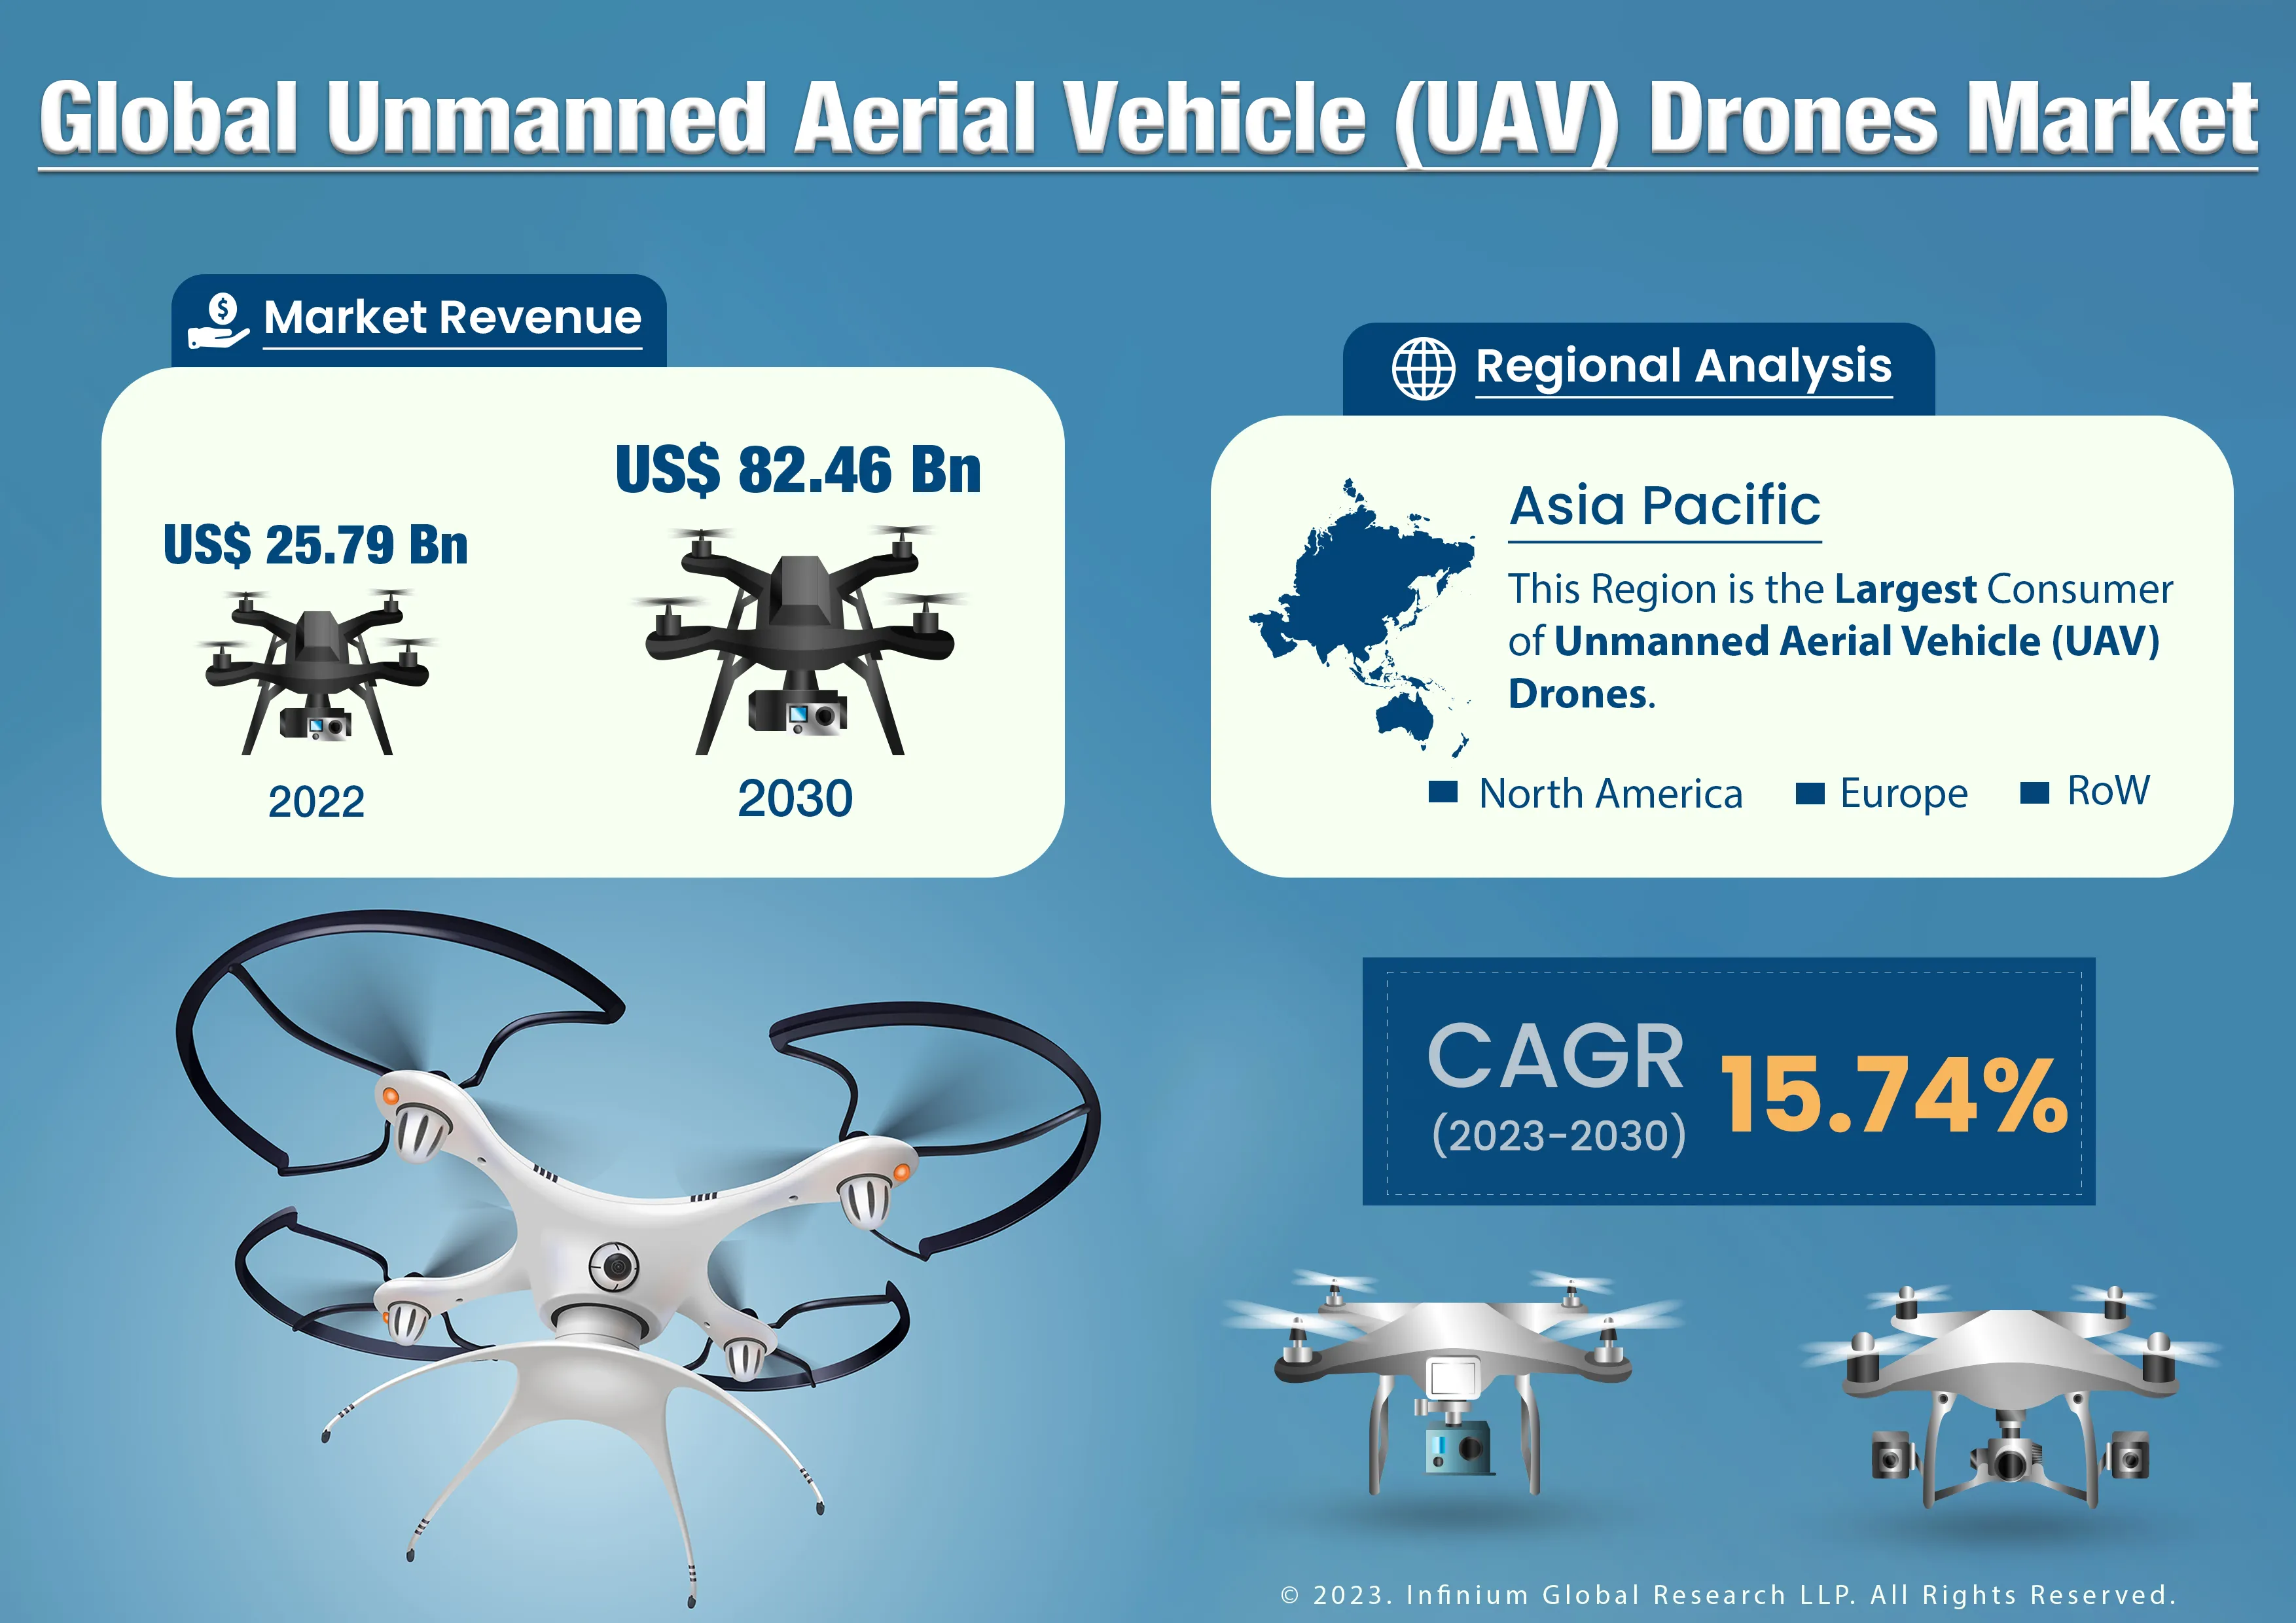 Global Unmanned Aerial Vehicle (UAV) Drones Market was Valued at USD 25.79 Billion in 2022 and is Expected to Reach USD 82.46 Billion by 2030 and Grow at a CAGR of 15.74% Over the Forecast Period.